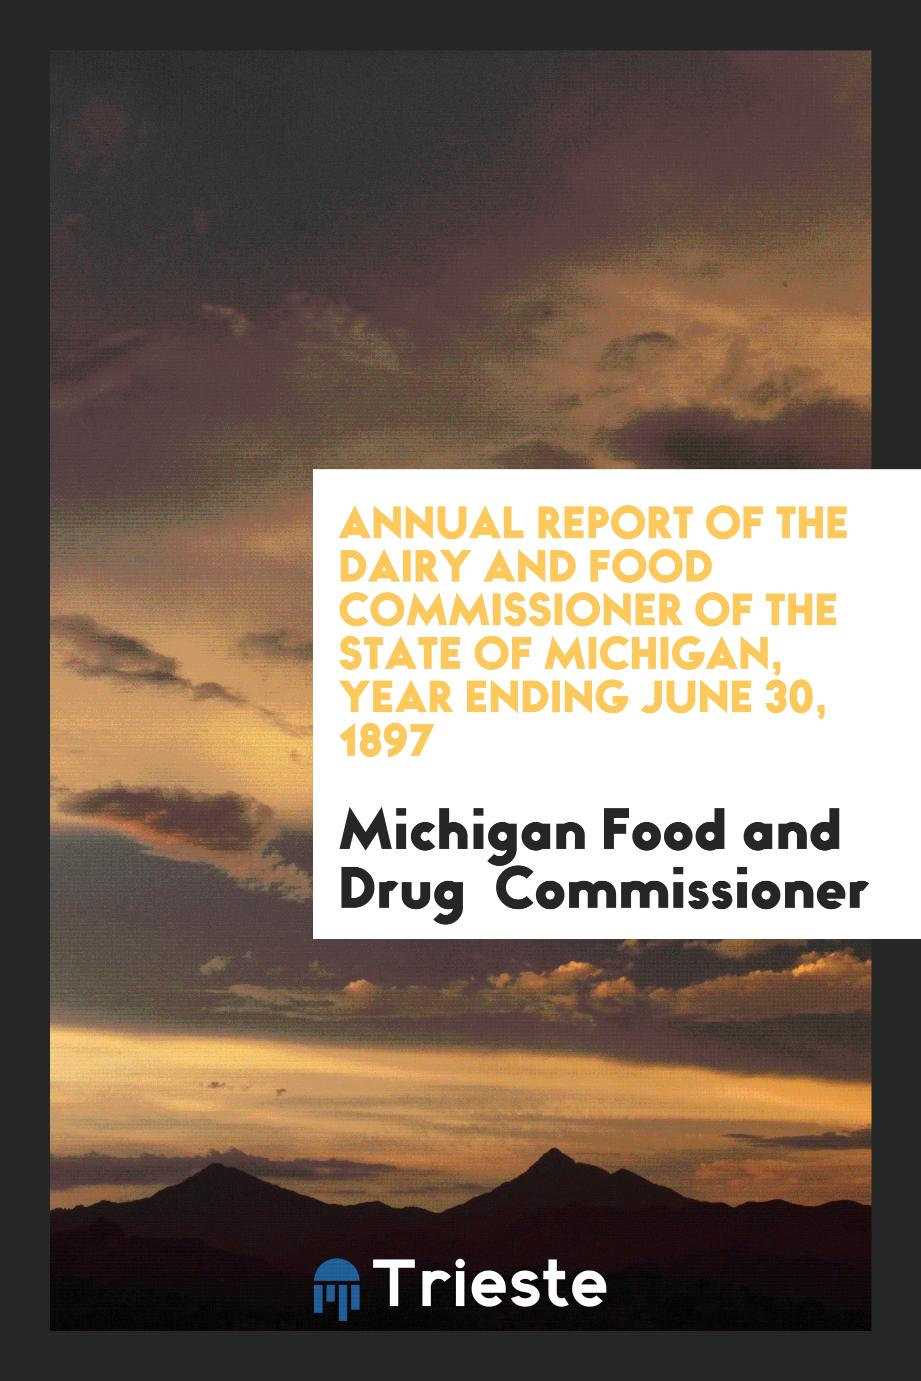 Annual Report of the Dairy and Food Commissioner of the State of Michigan, Year Ending June 30, 1897